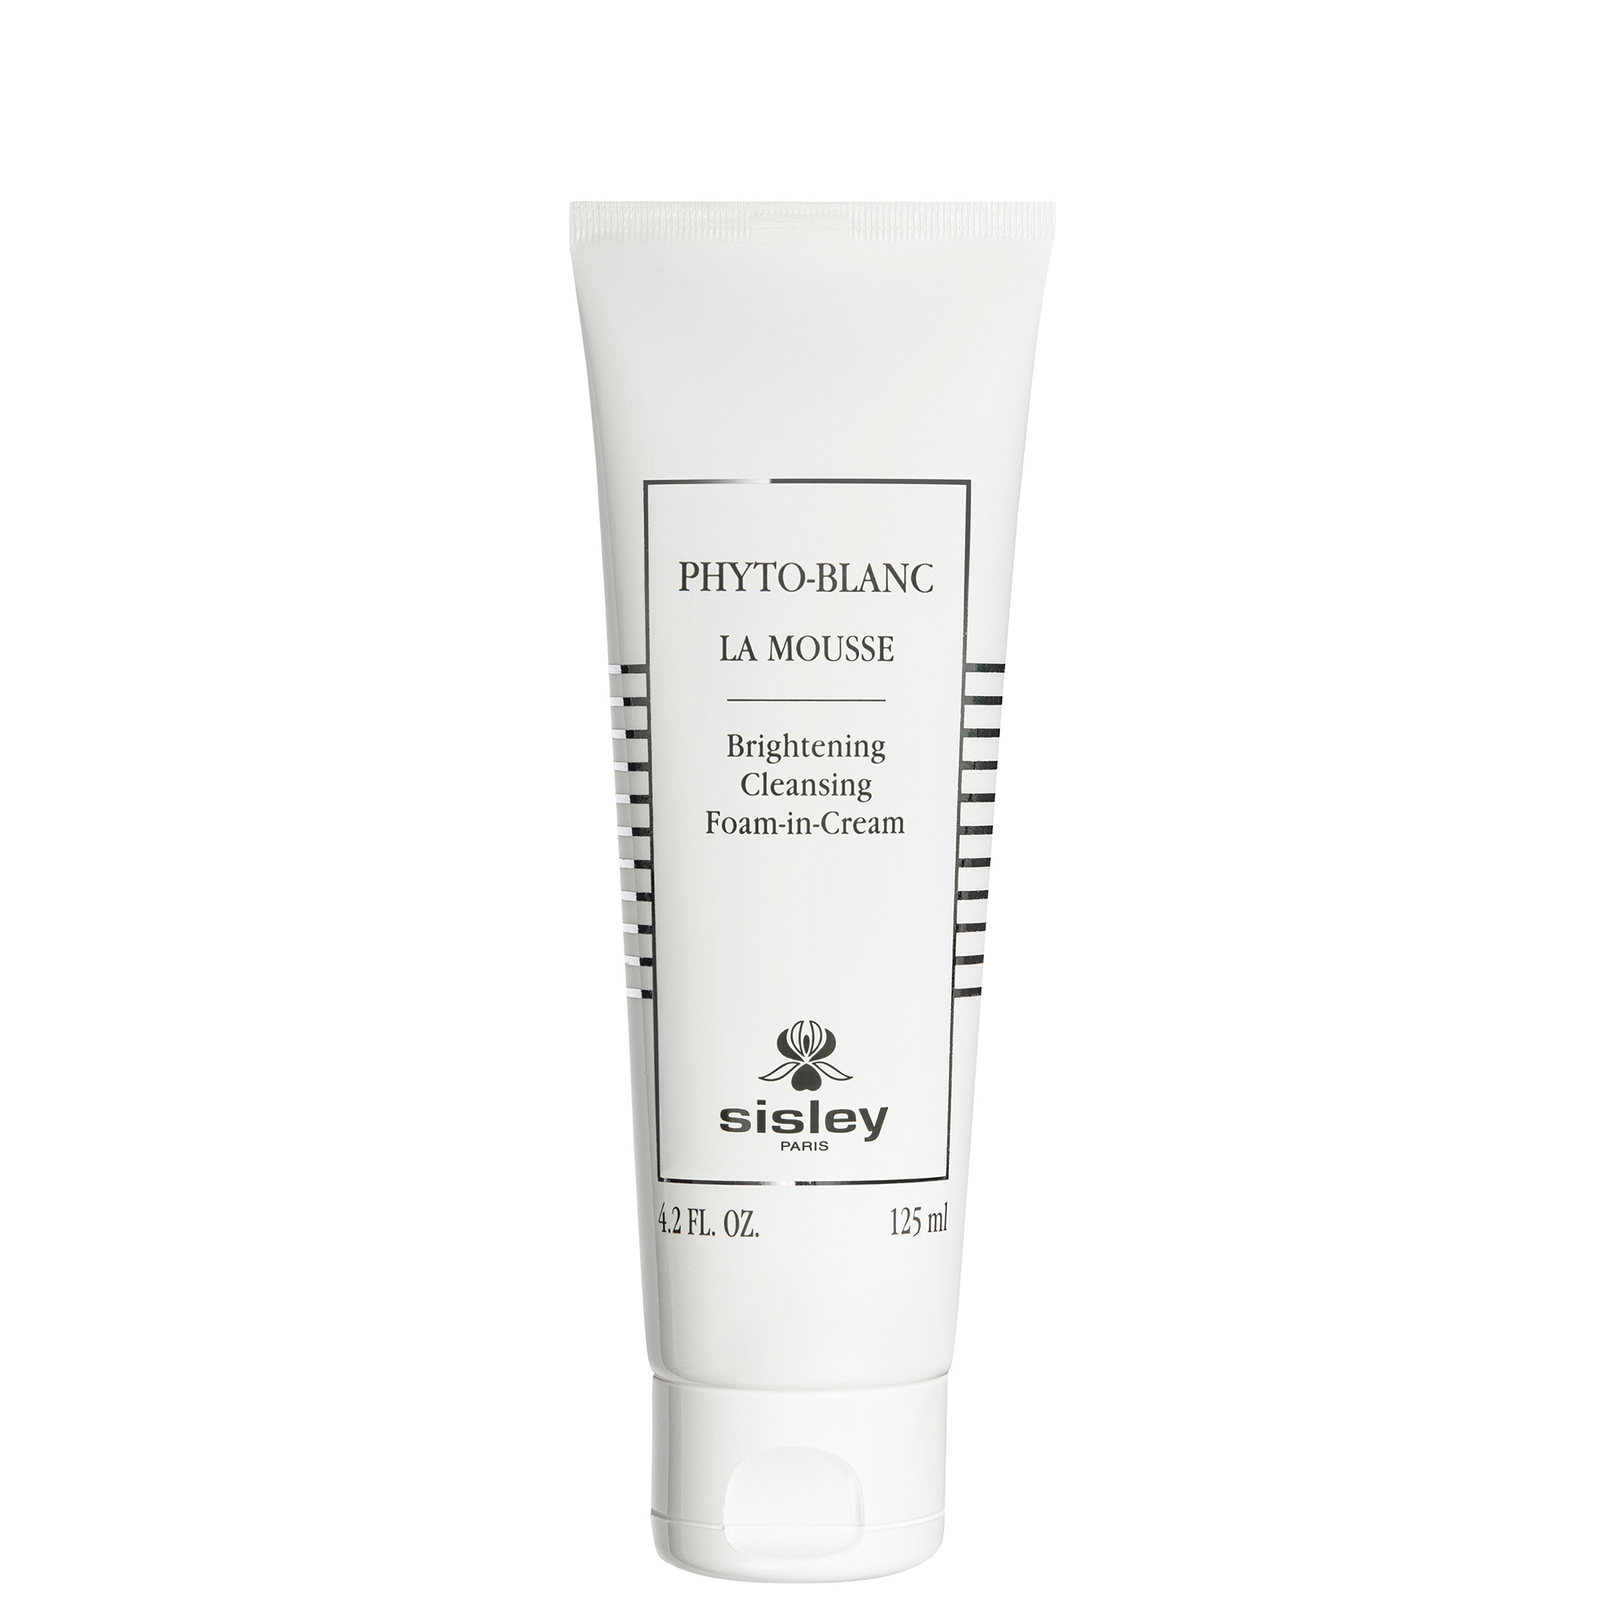 Photos - Facial / Body Cleansing Product Sisley Phyto-Blanc La Mousse Brightening Cleansing Foam-in-Cream 125ml 